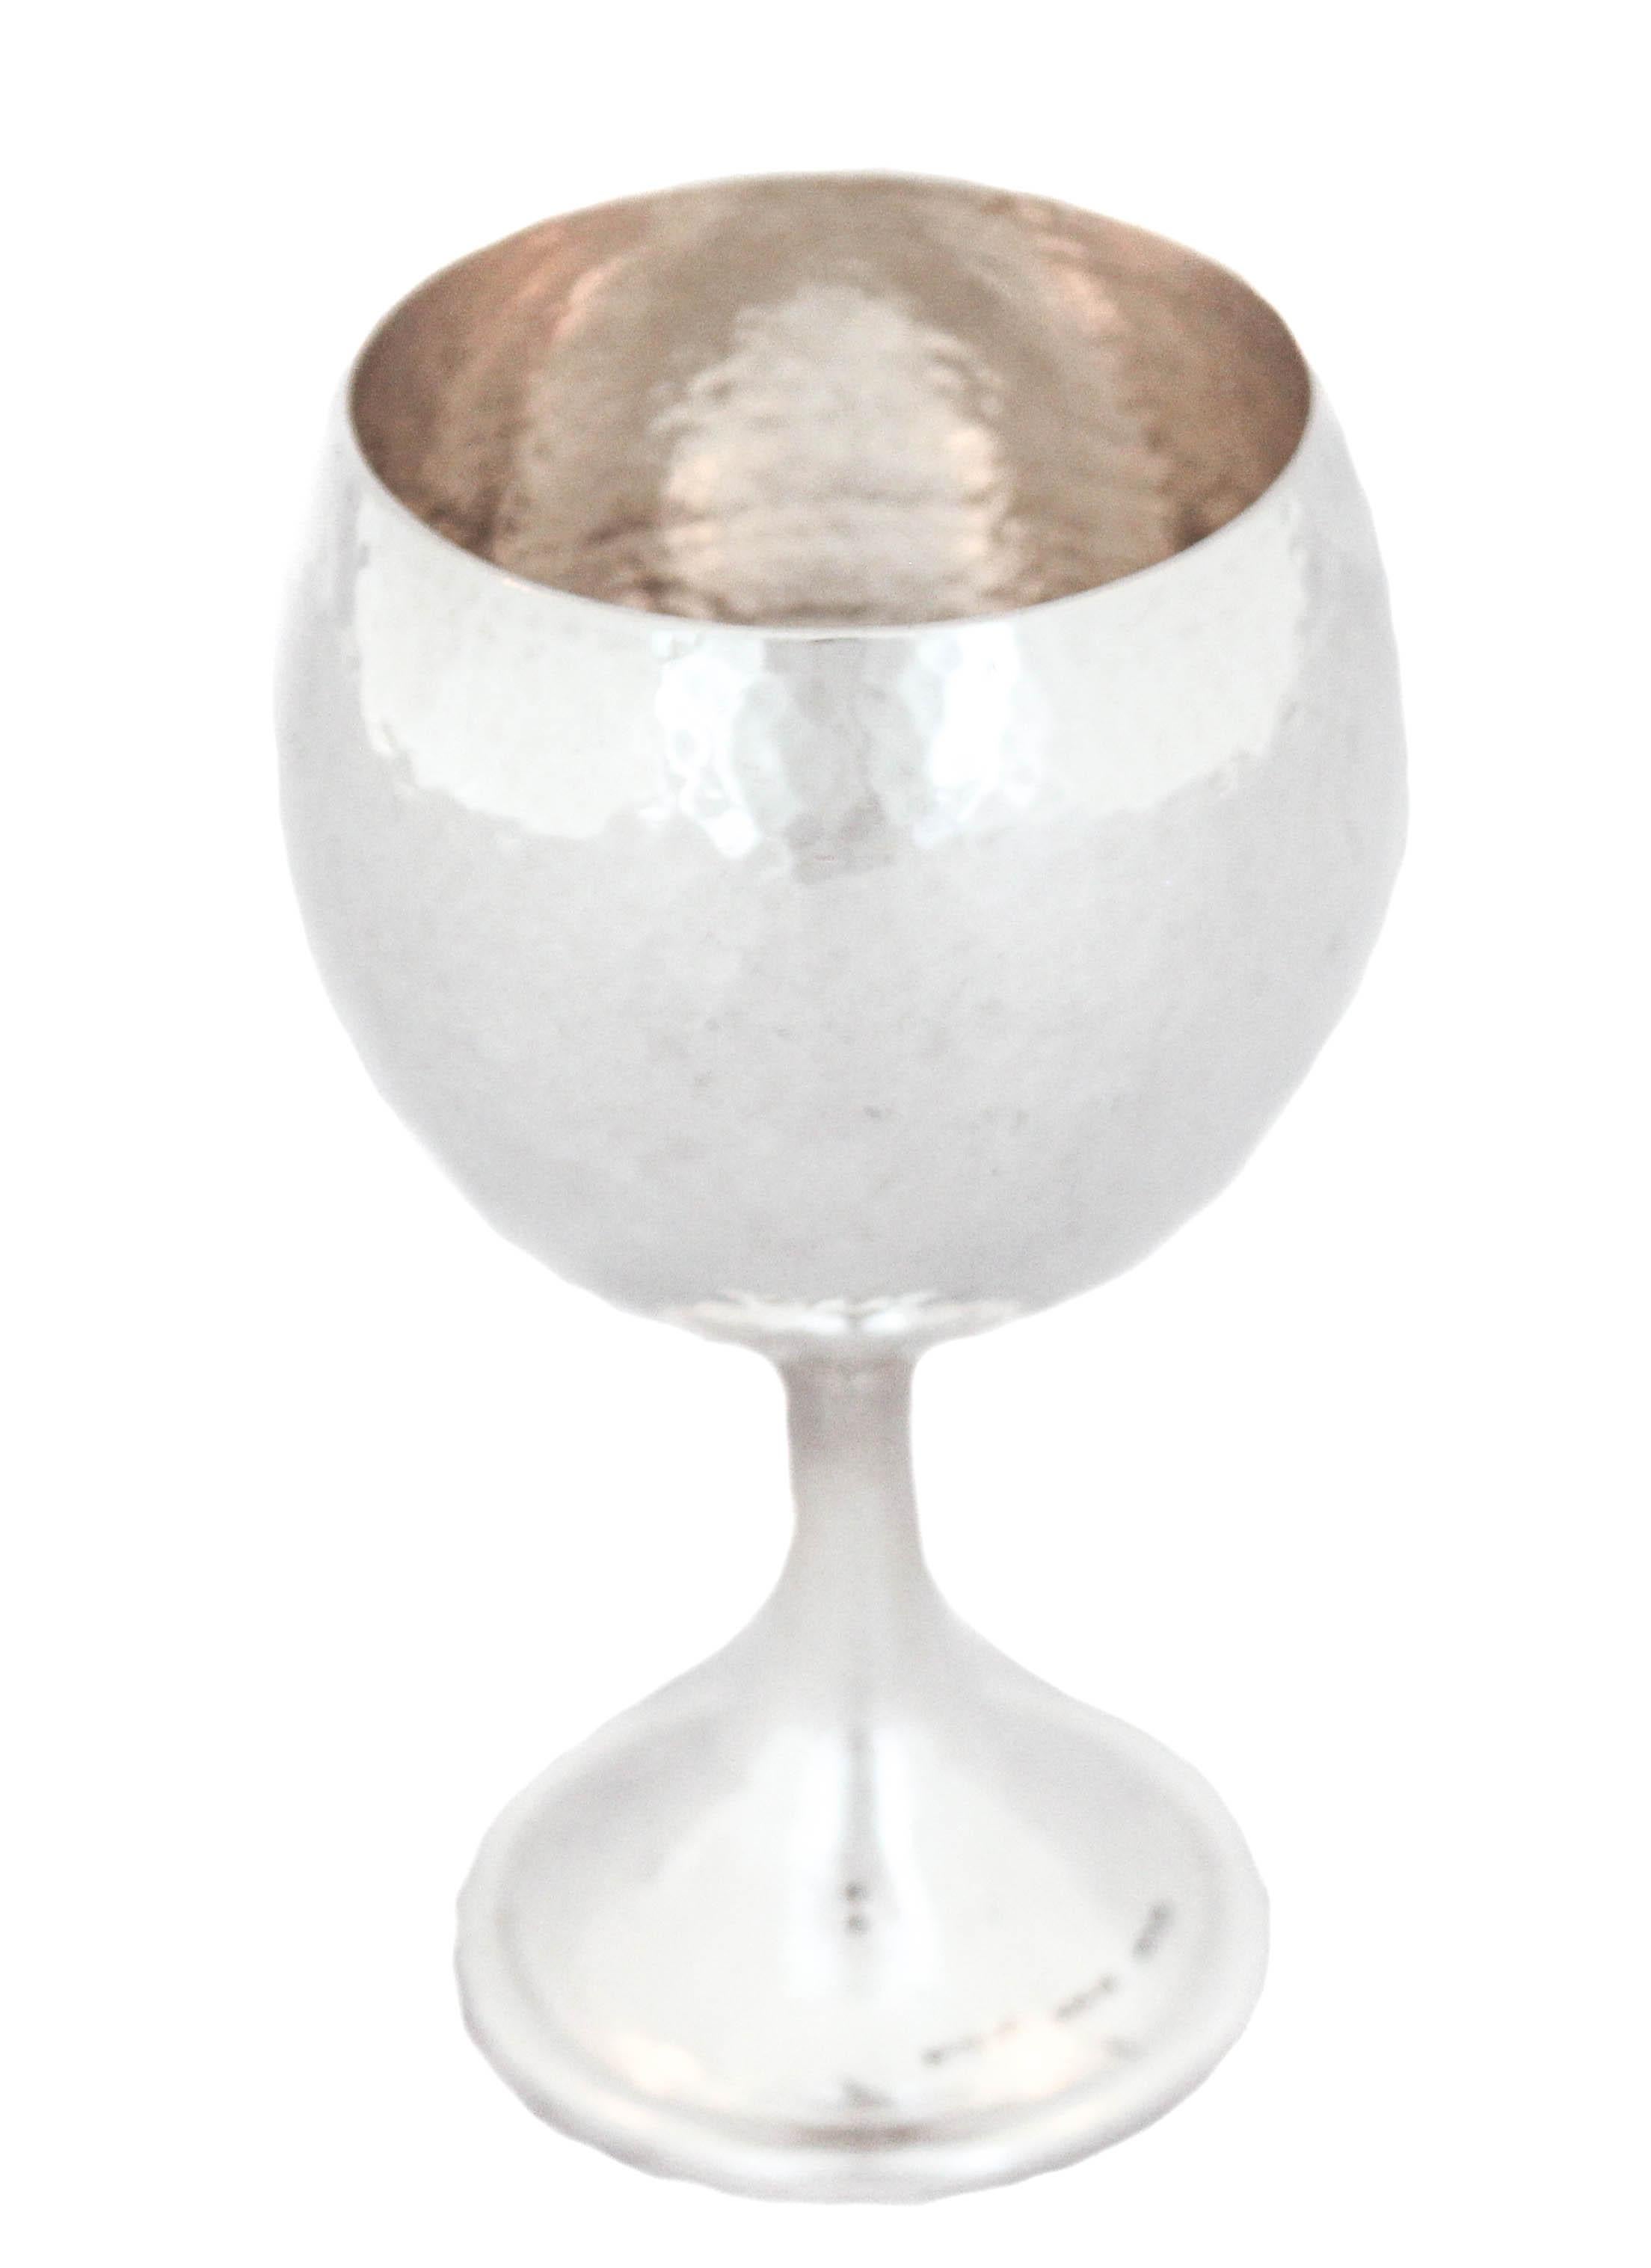 This sterling silver hand hammered goblet is made by and signed “Buccellati Sterling”. It is modern and still elegant. The top portion is rounded and compliments the stem base. A real treasure waiting to grace your table!